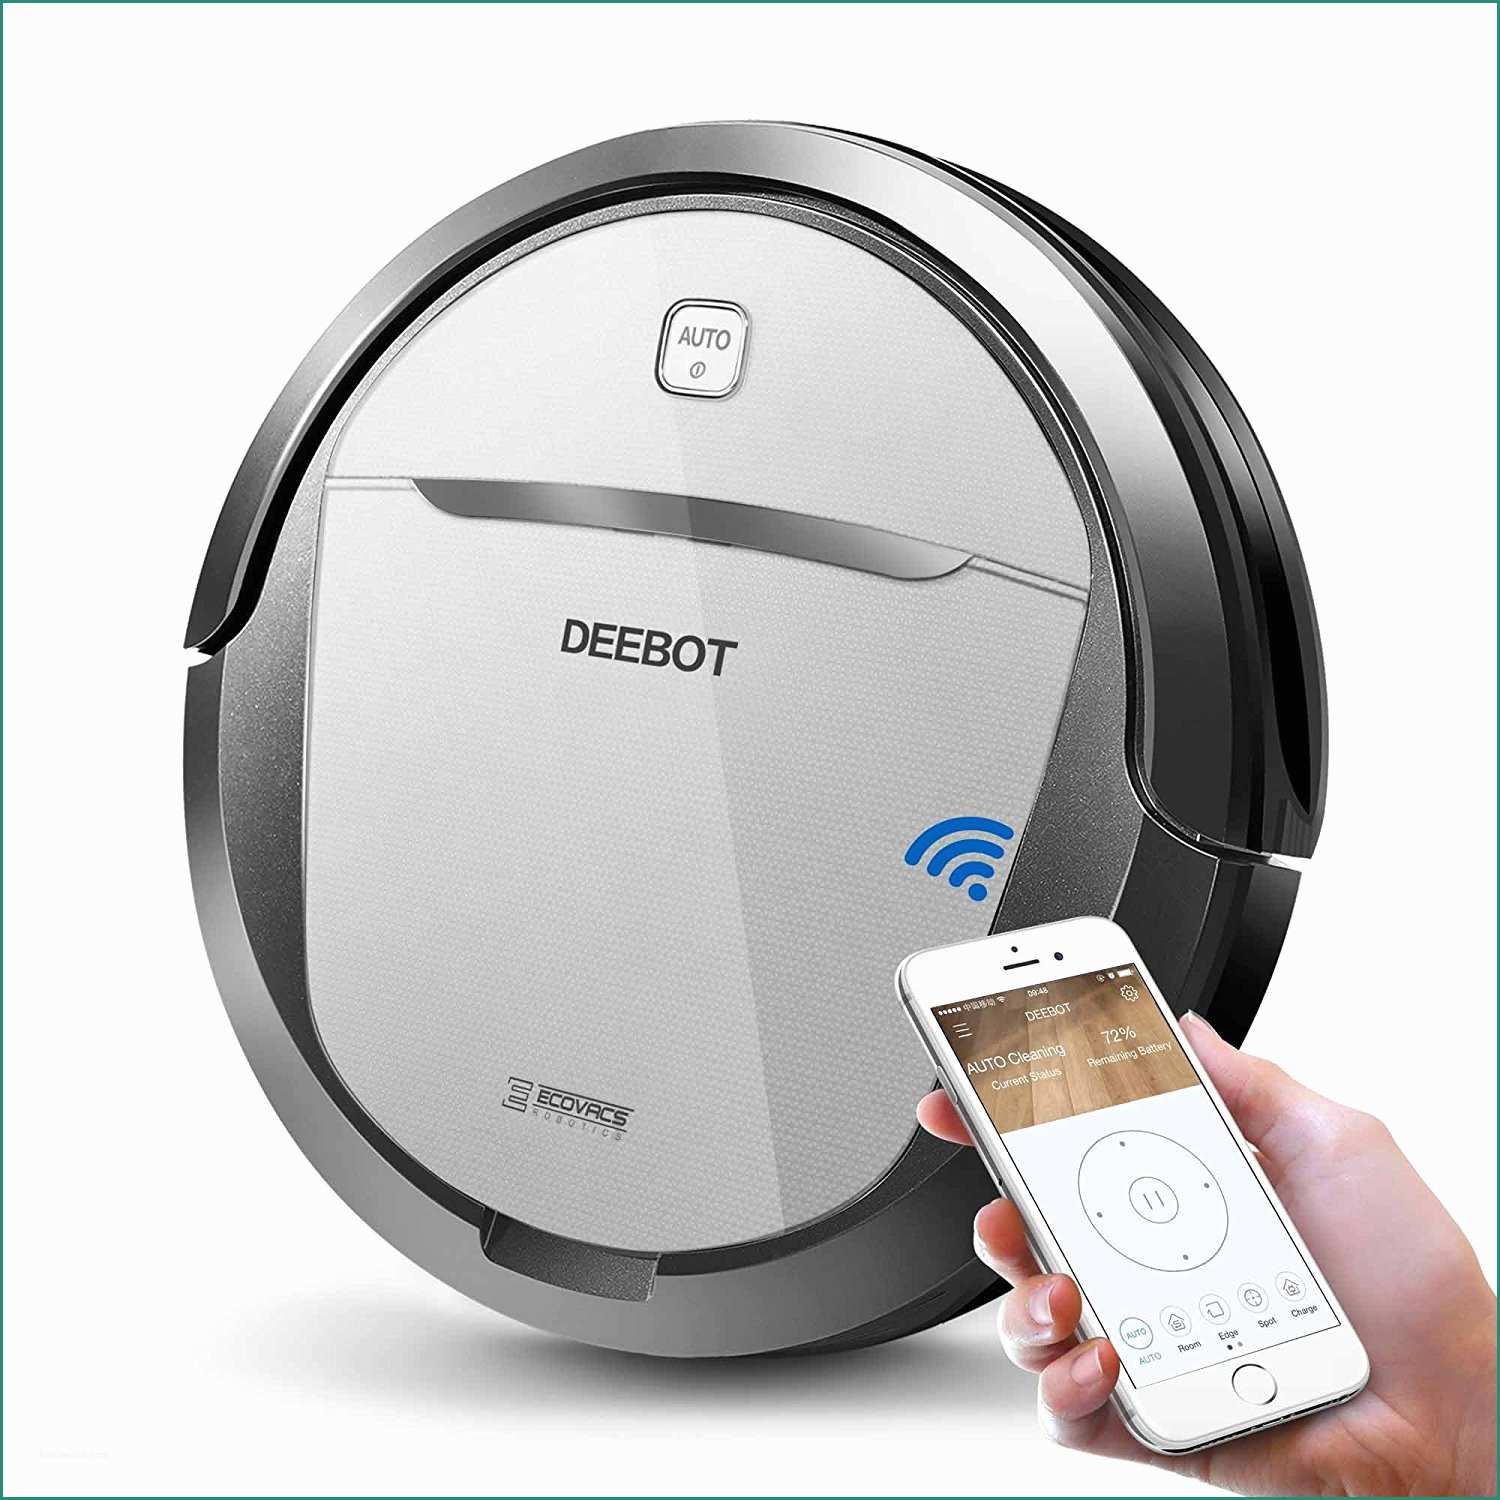 Roomba Recensioni E 7 Best Robot Vacuums In 2018 with High Quality Cleaning